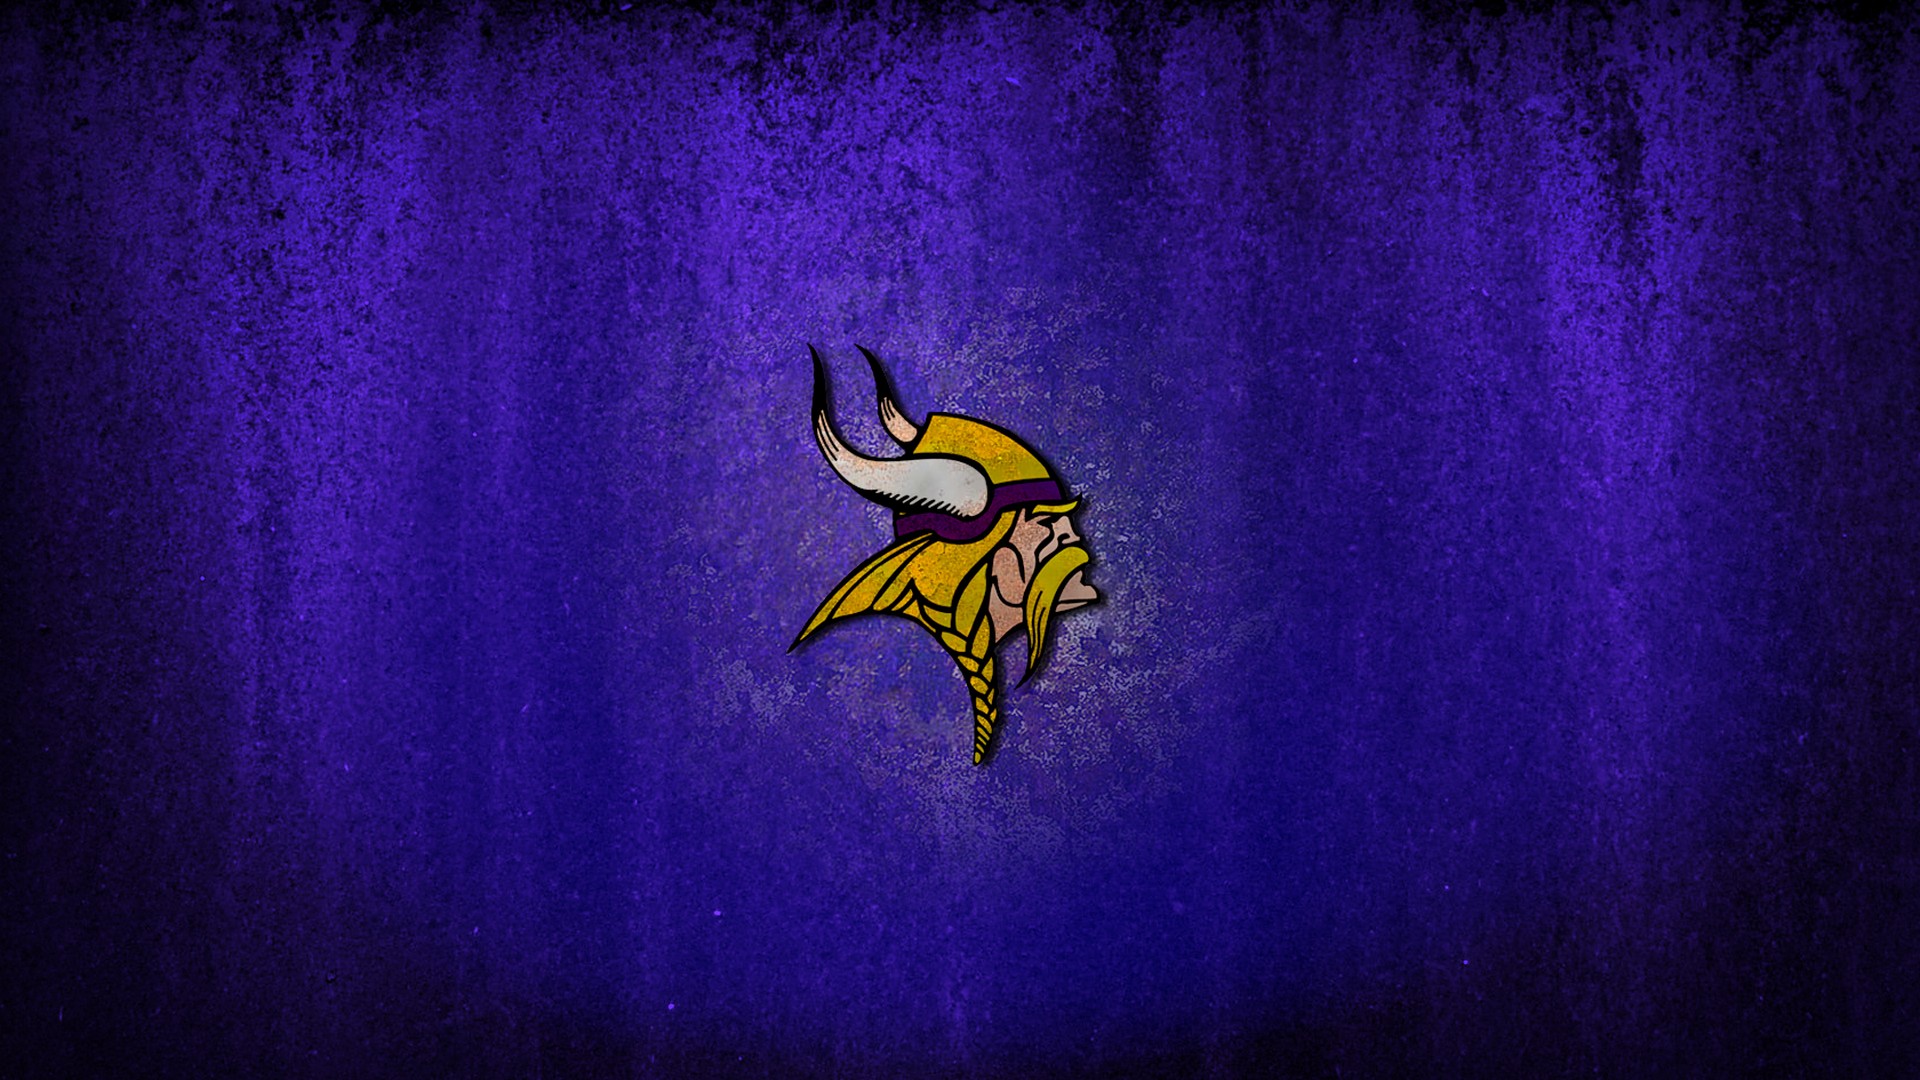 Wallpapers Minnesota Vikings with resolution 1920x1080 pixel. You can make this wallpaper for your Mac or Windows Desktop Background, iPhone, Android or Tablet and another Smartphone device